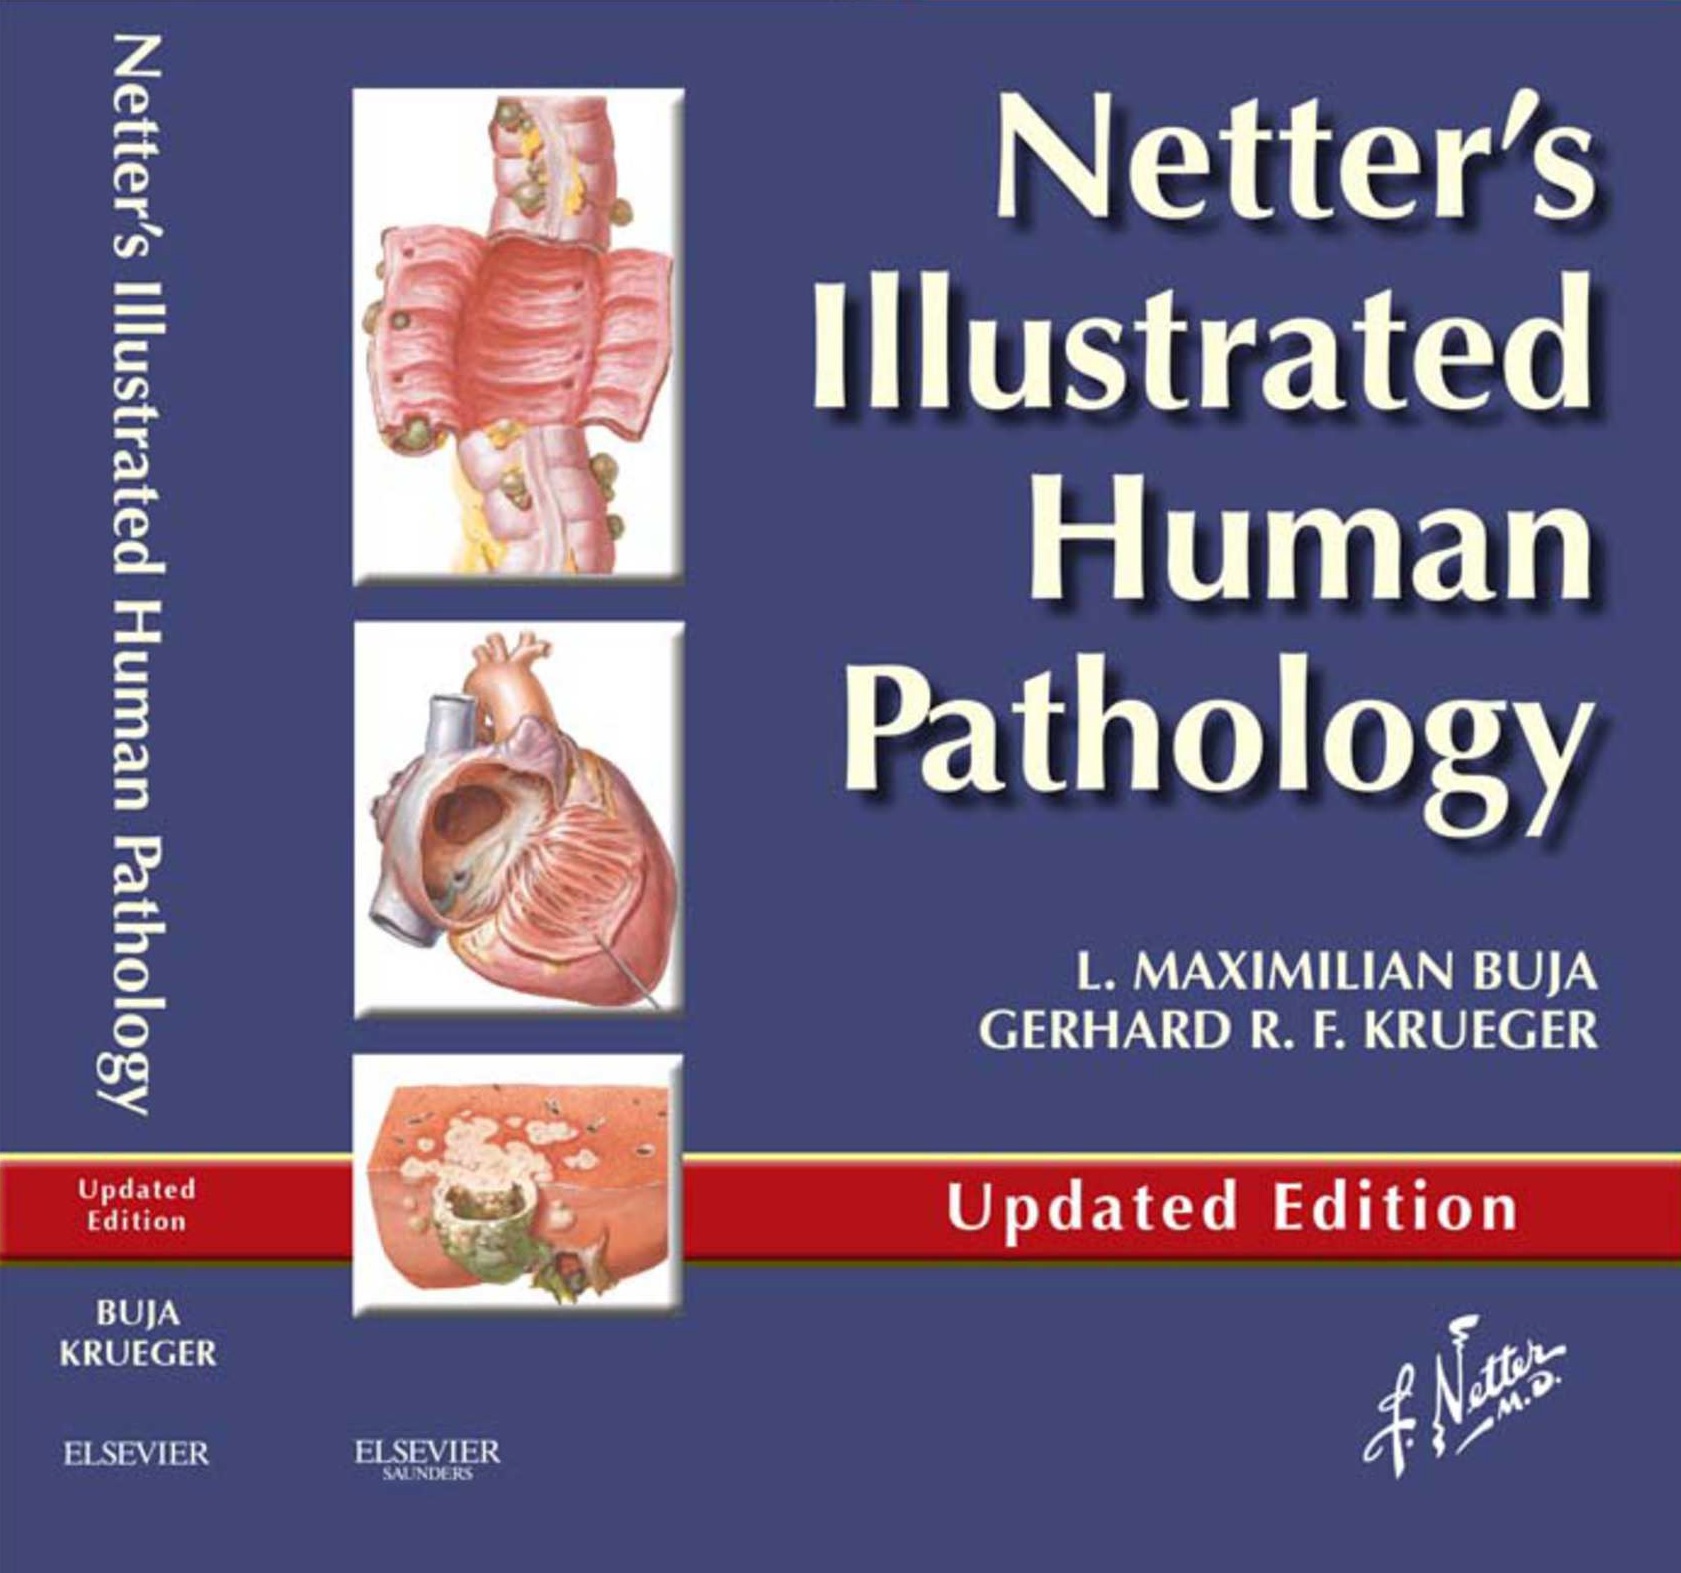 Netter’s Illustrated Human Pathology SECOND EDITION pdf book free download